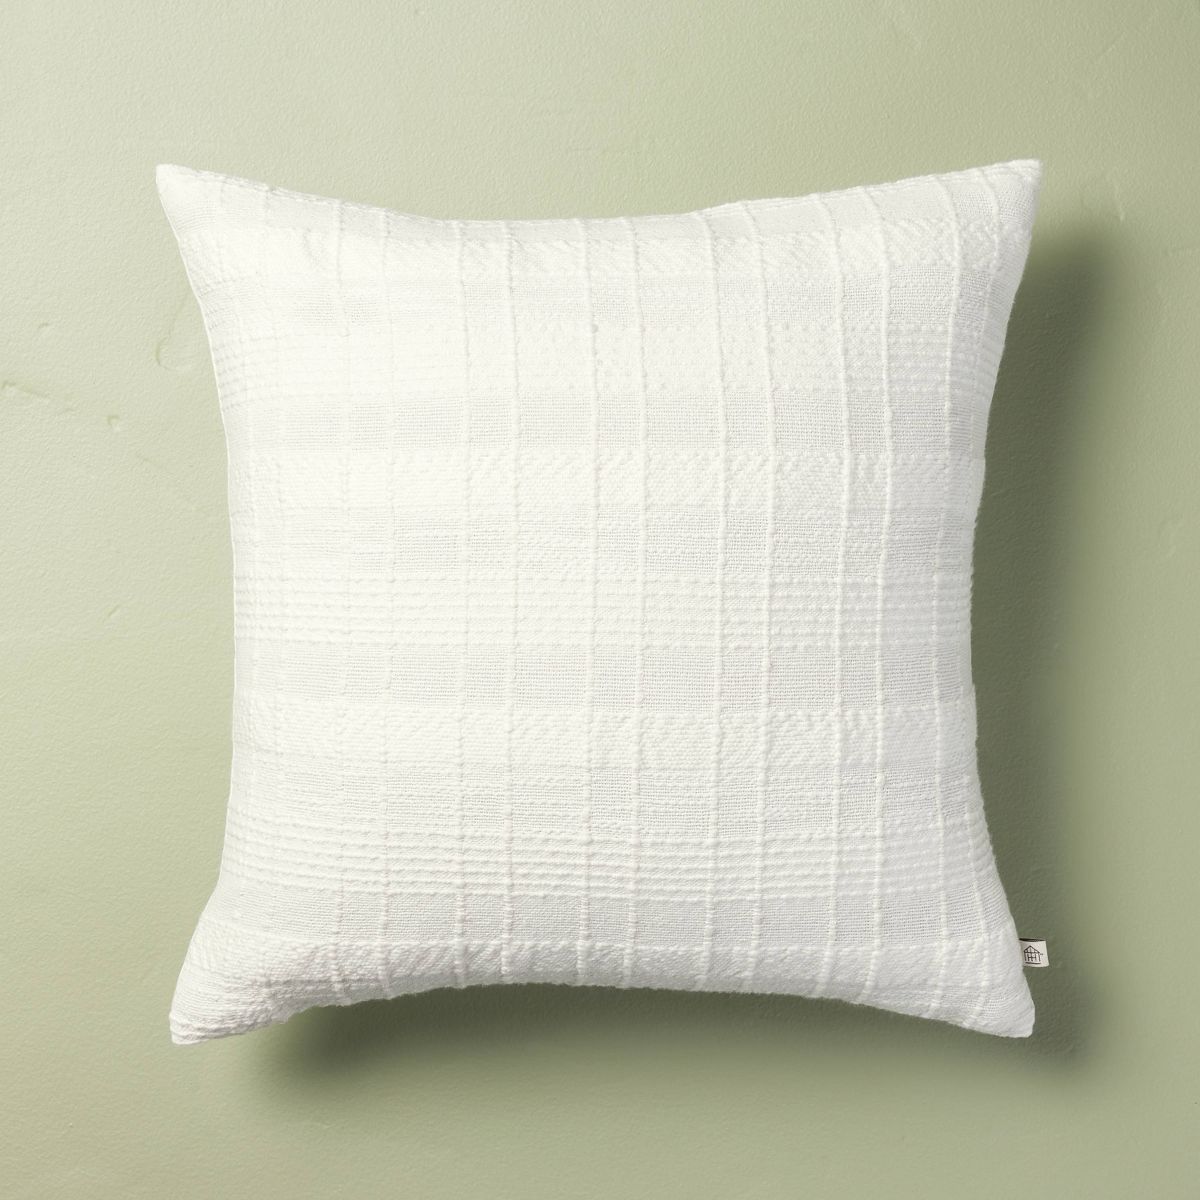 18"x18" Textured Crosshatch Stripe Square Throw Pillow Cream - Hearth & Hand™ with Magnolia | Target